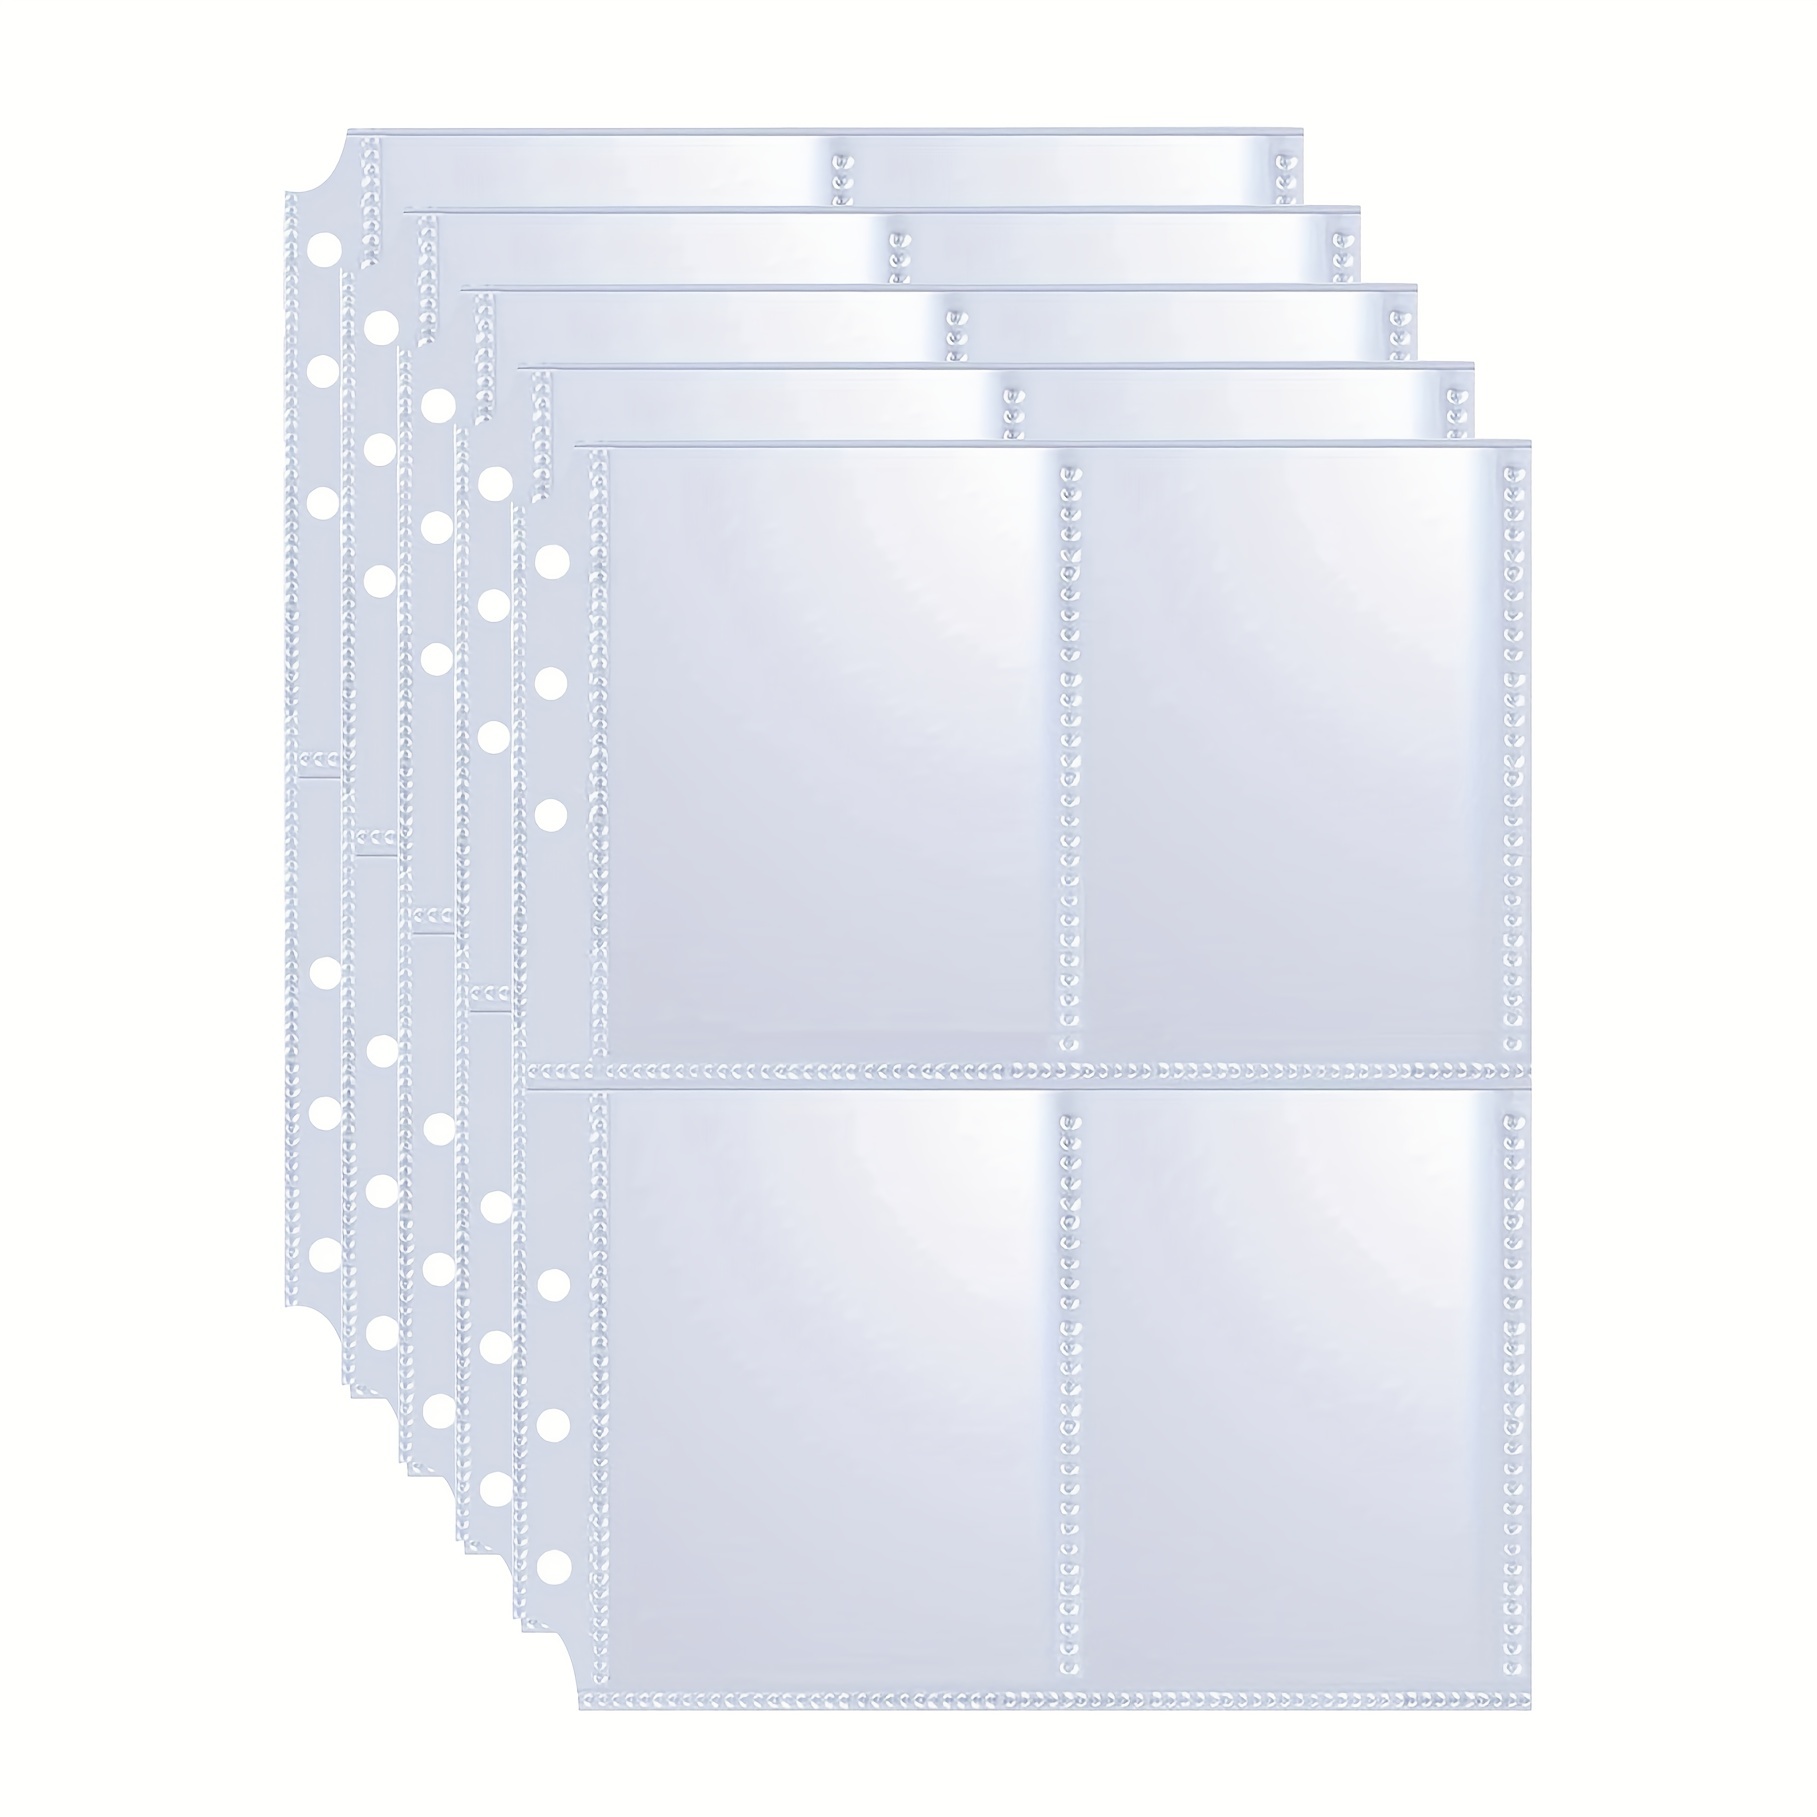  TYH Supplies Heavy Duty Trading Card Sleeves for 3 Ring Binder, Double Sided Ultra Clear 11 Hole